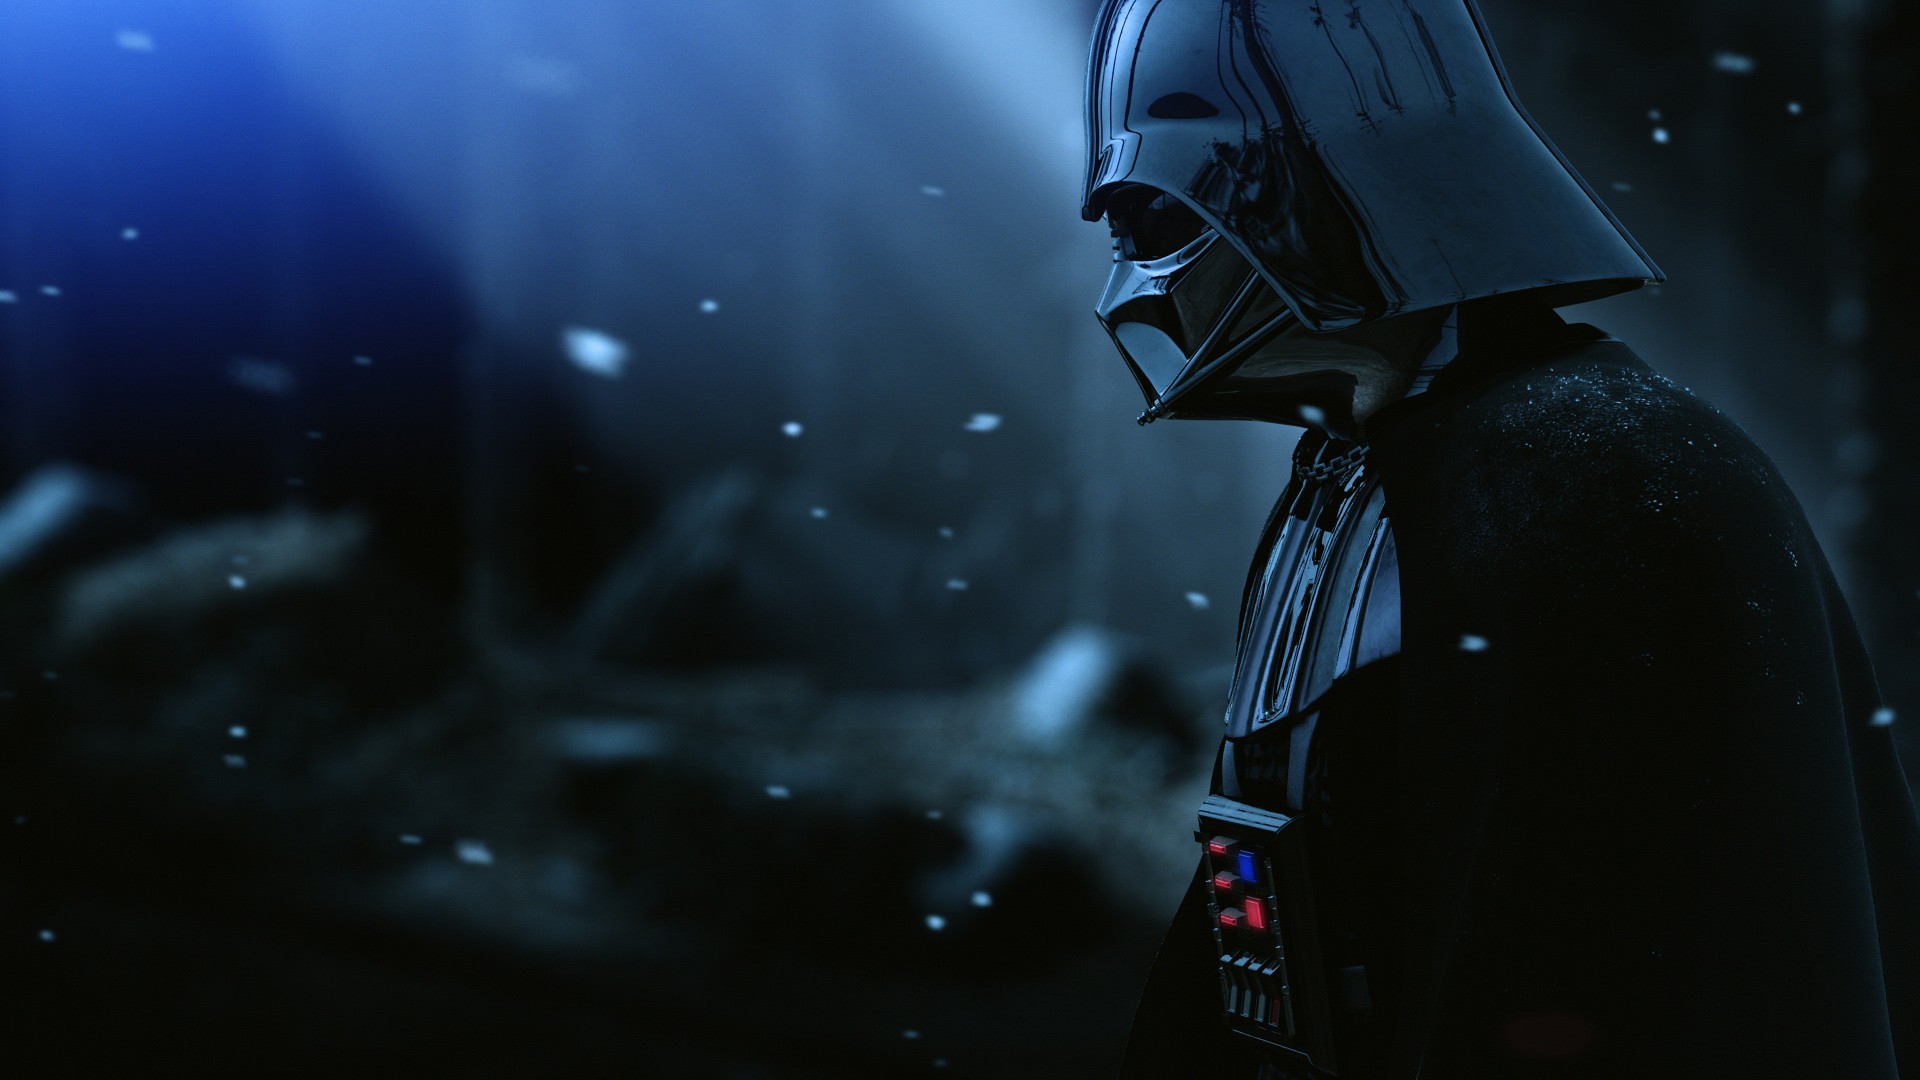 Download High quality Peaceful Darth Vader Character wallpaper / 1920x1080